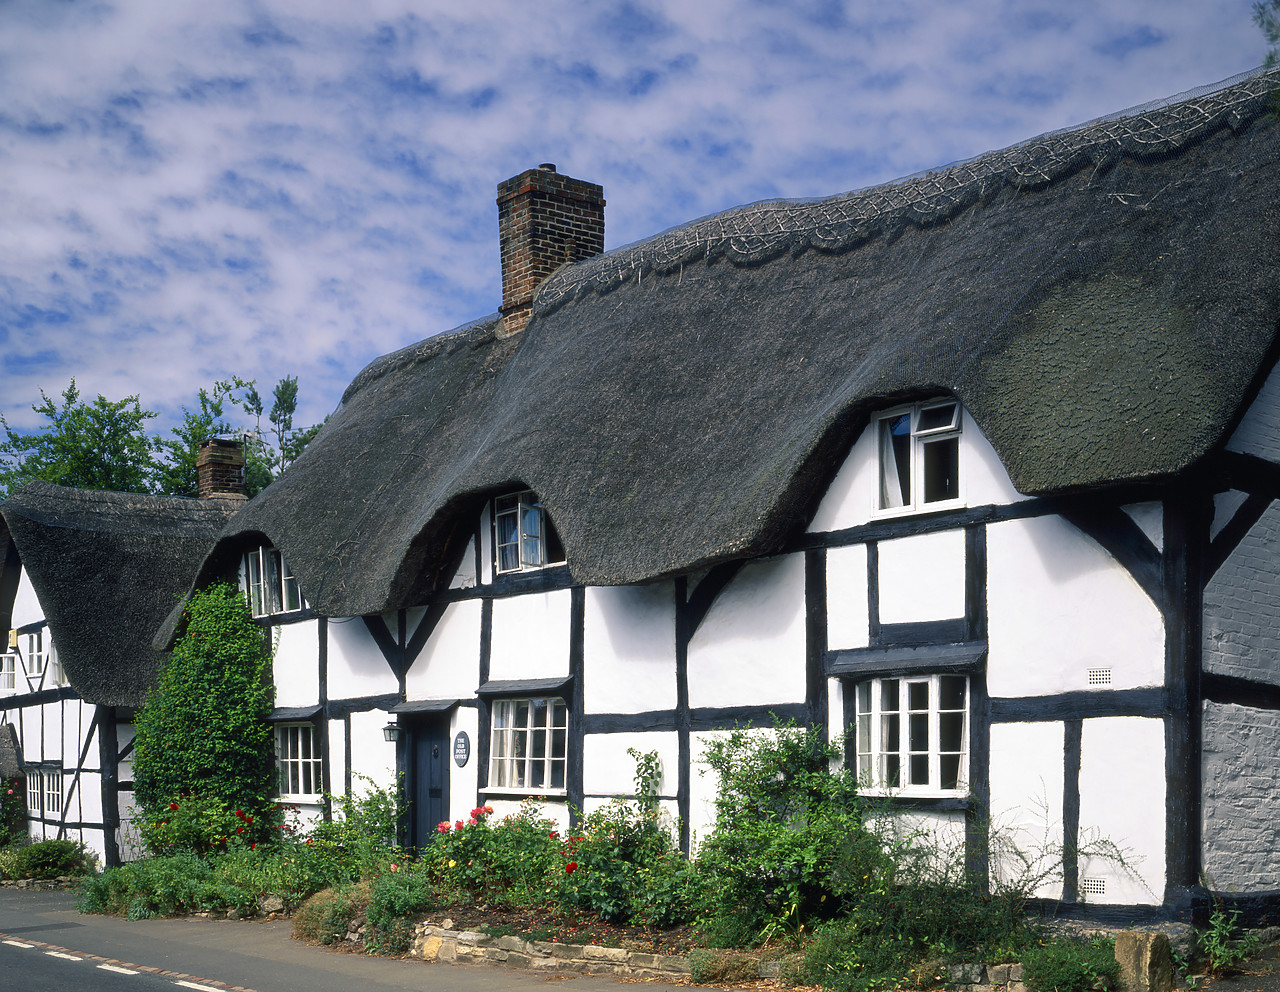 #990474-1 - Thatched Cottages, Cropthorne, Herefordshire, England